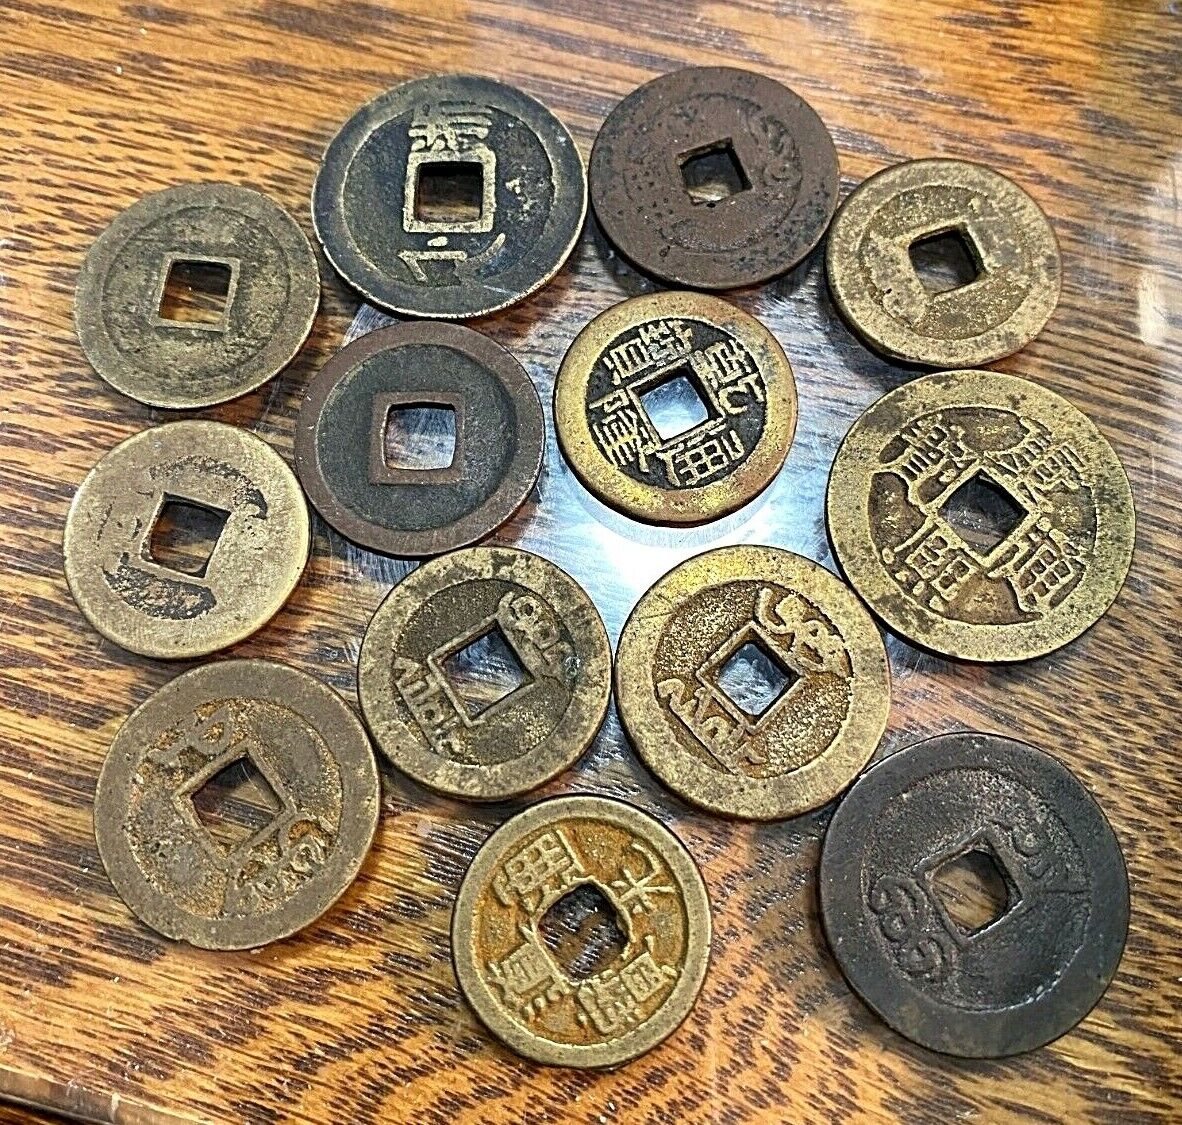 Lucky 13 China Cash Coins from Old Estate Great Price CHN Без бренда - фотография #2